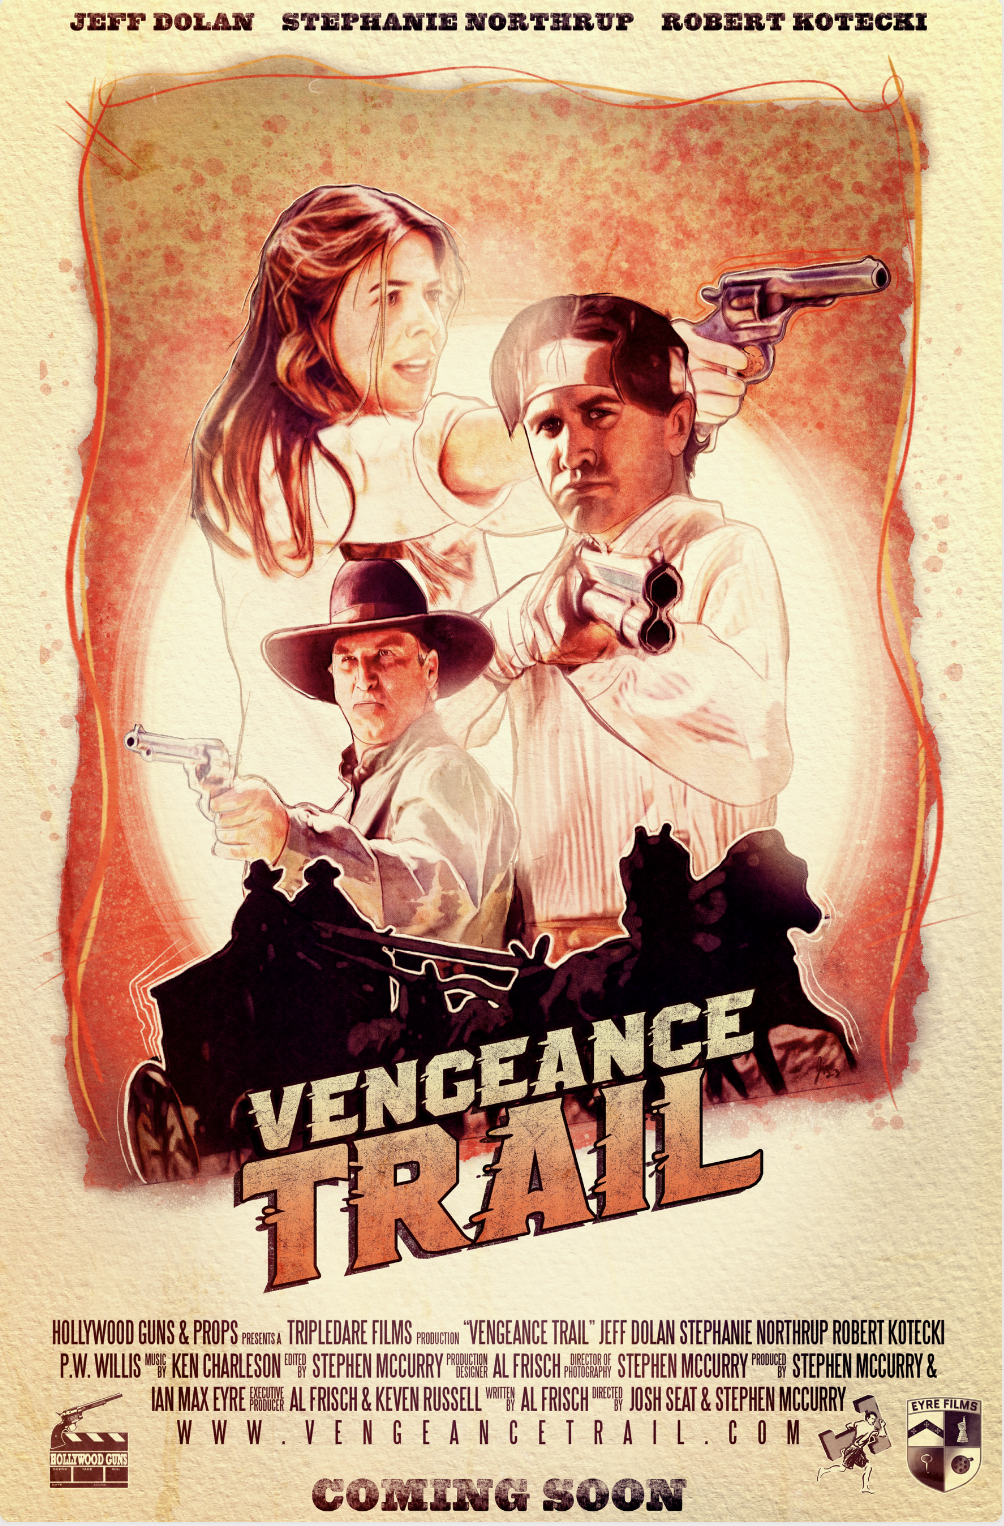 Vengeance Trail poster by James Burns